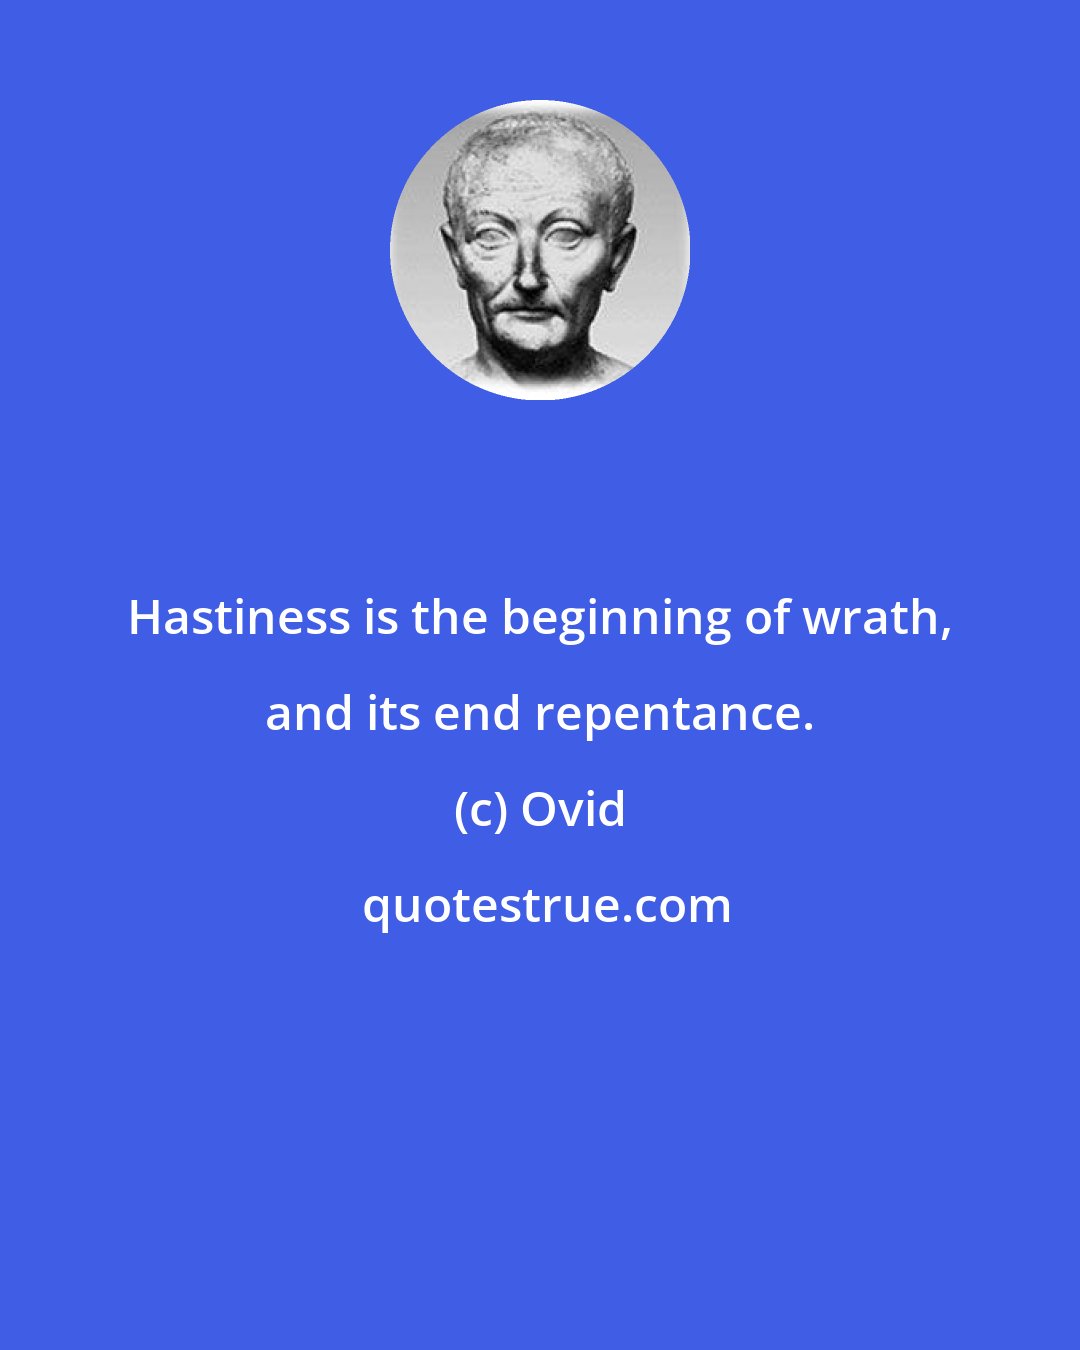 Ovid: Hastiness is the beginning of wrath, and its end repentance.